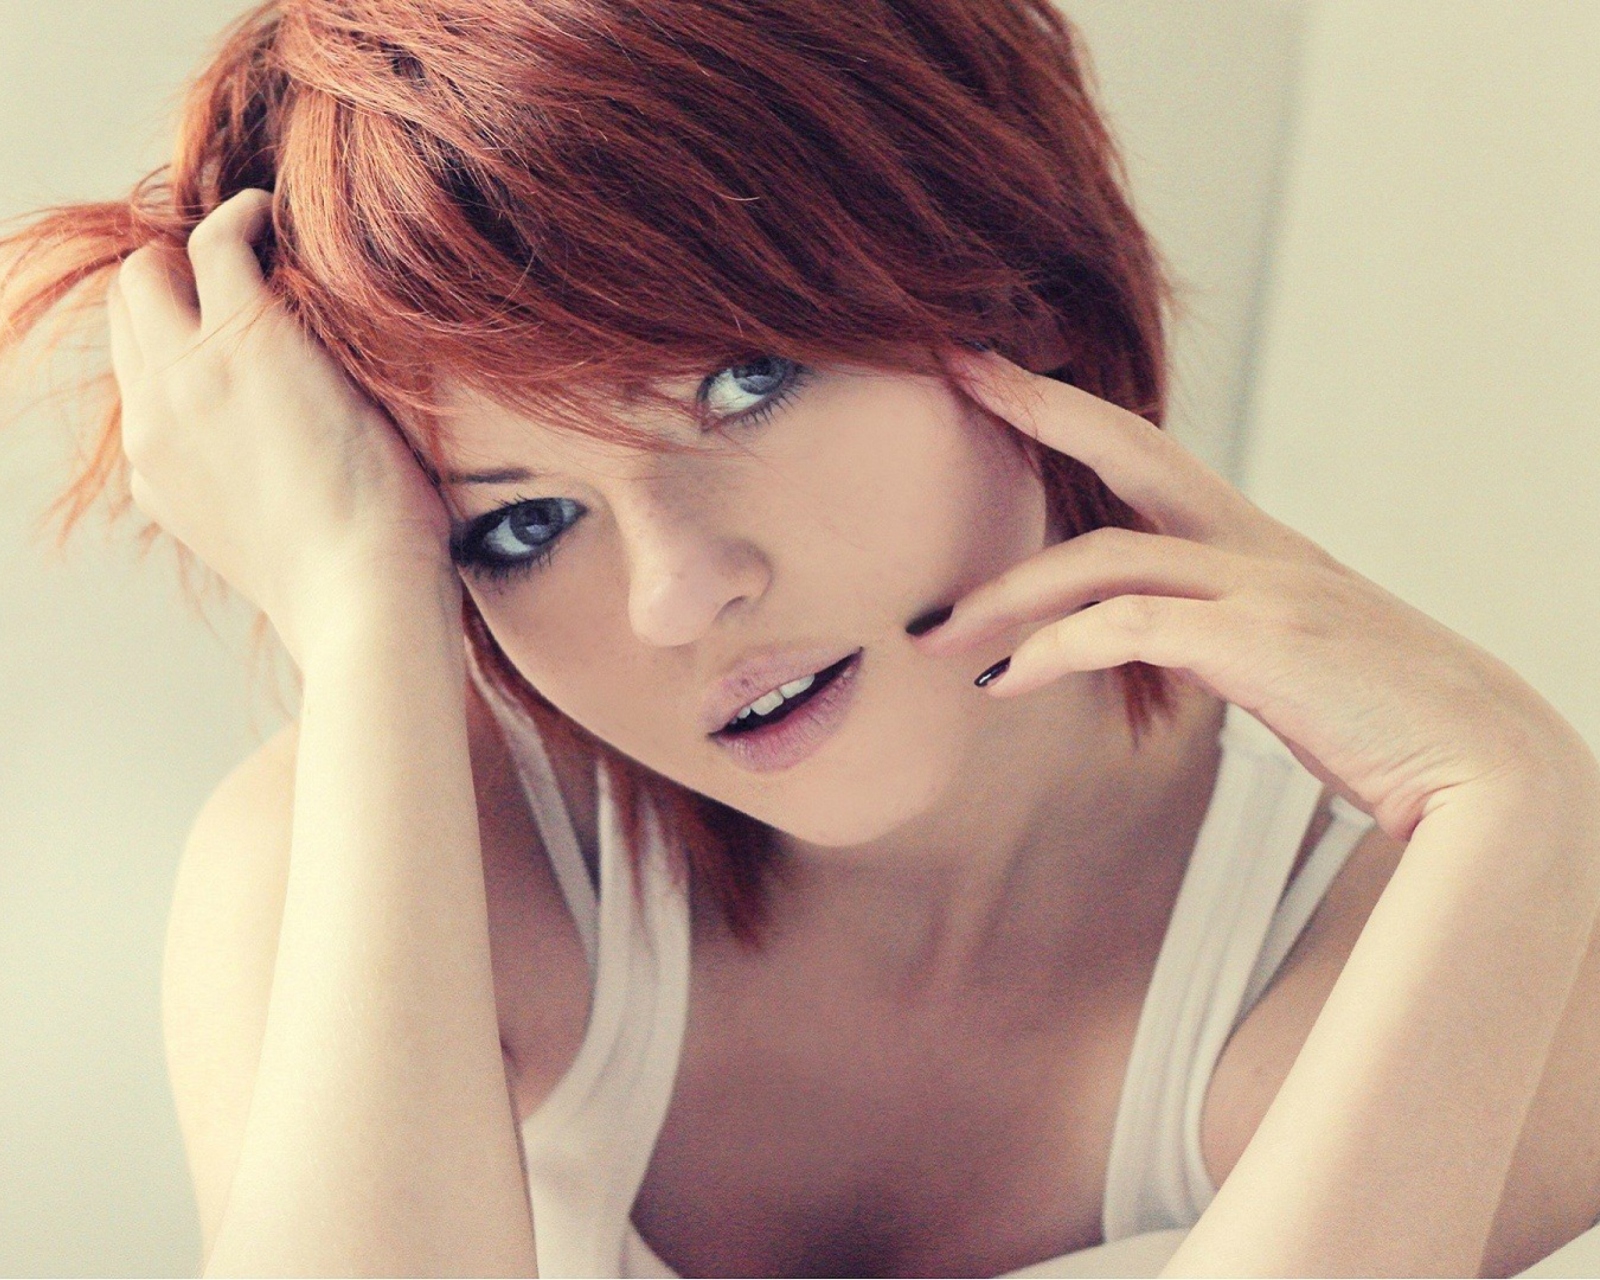 Redhead In White Top wallpaper 1600x1280